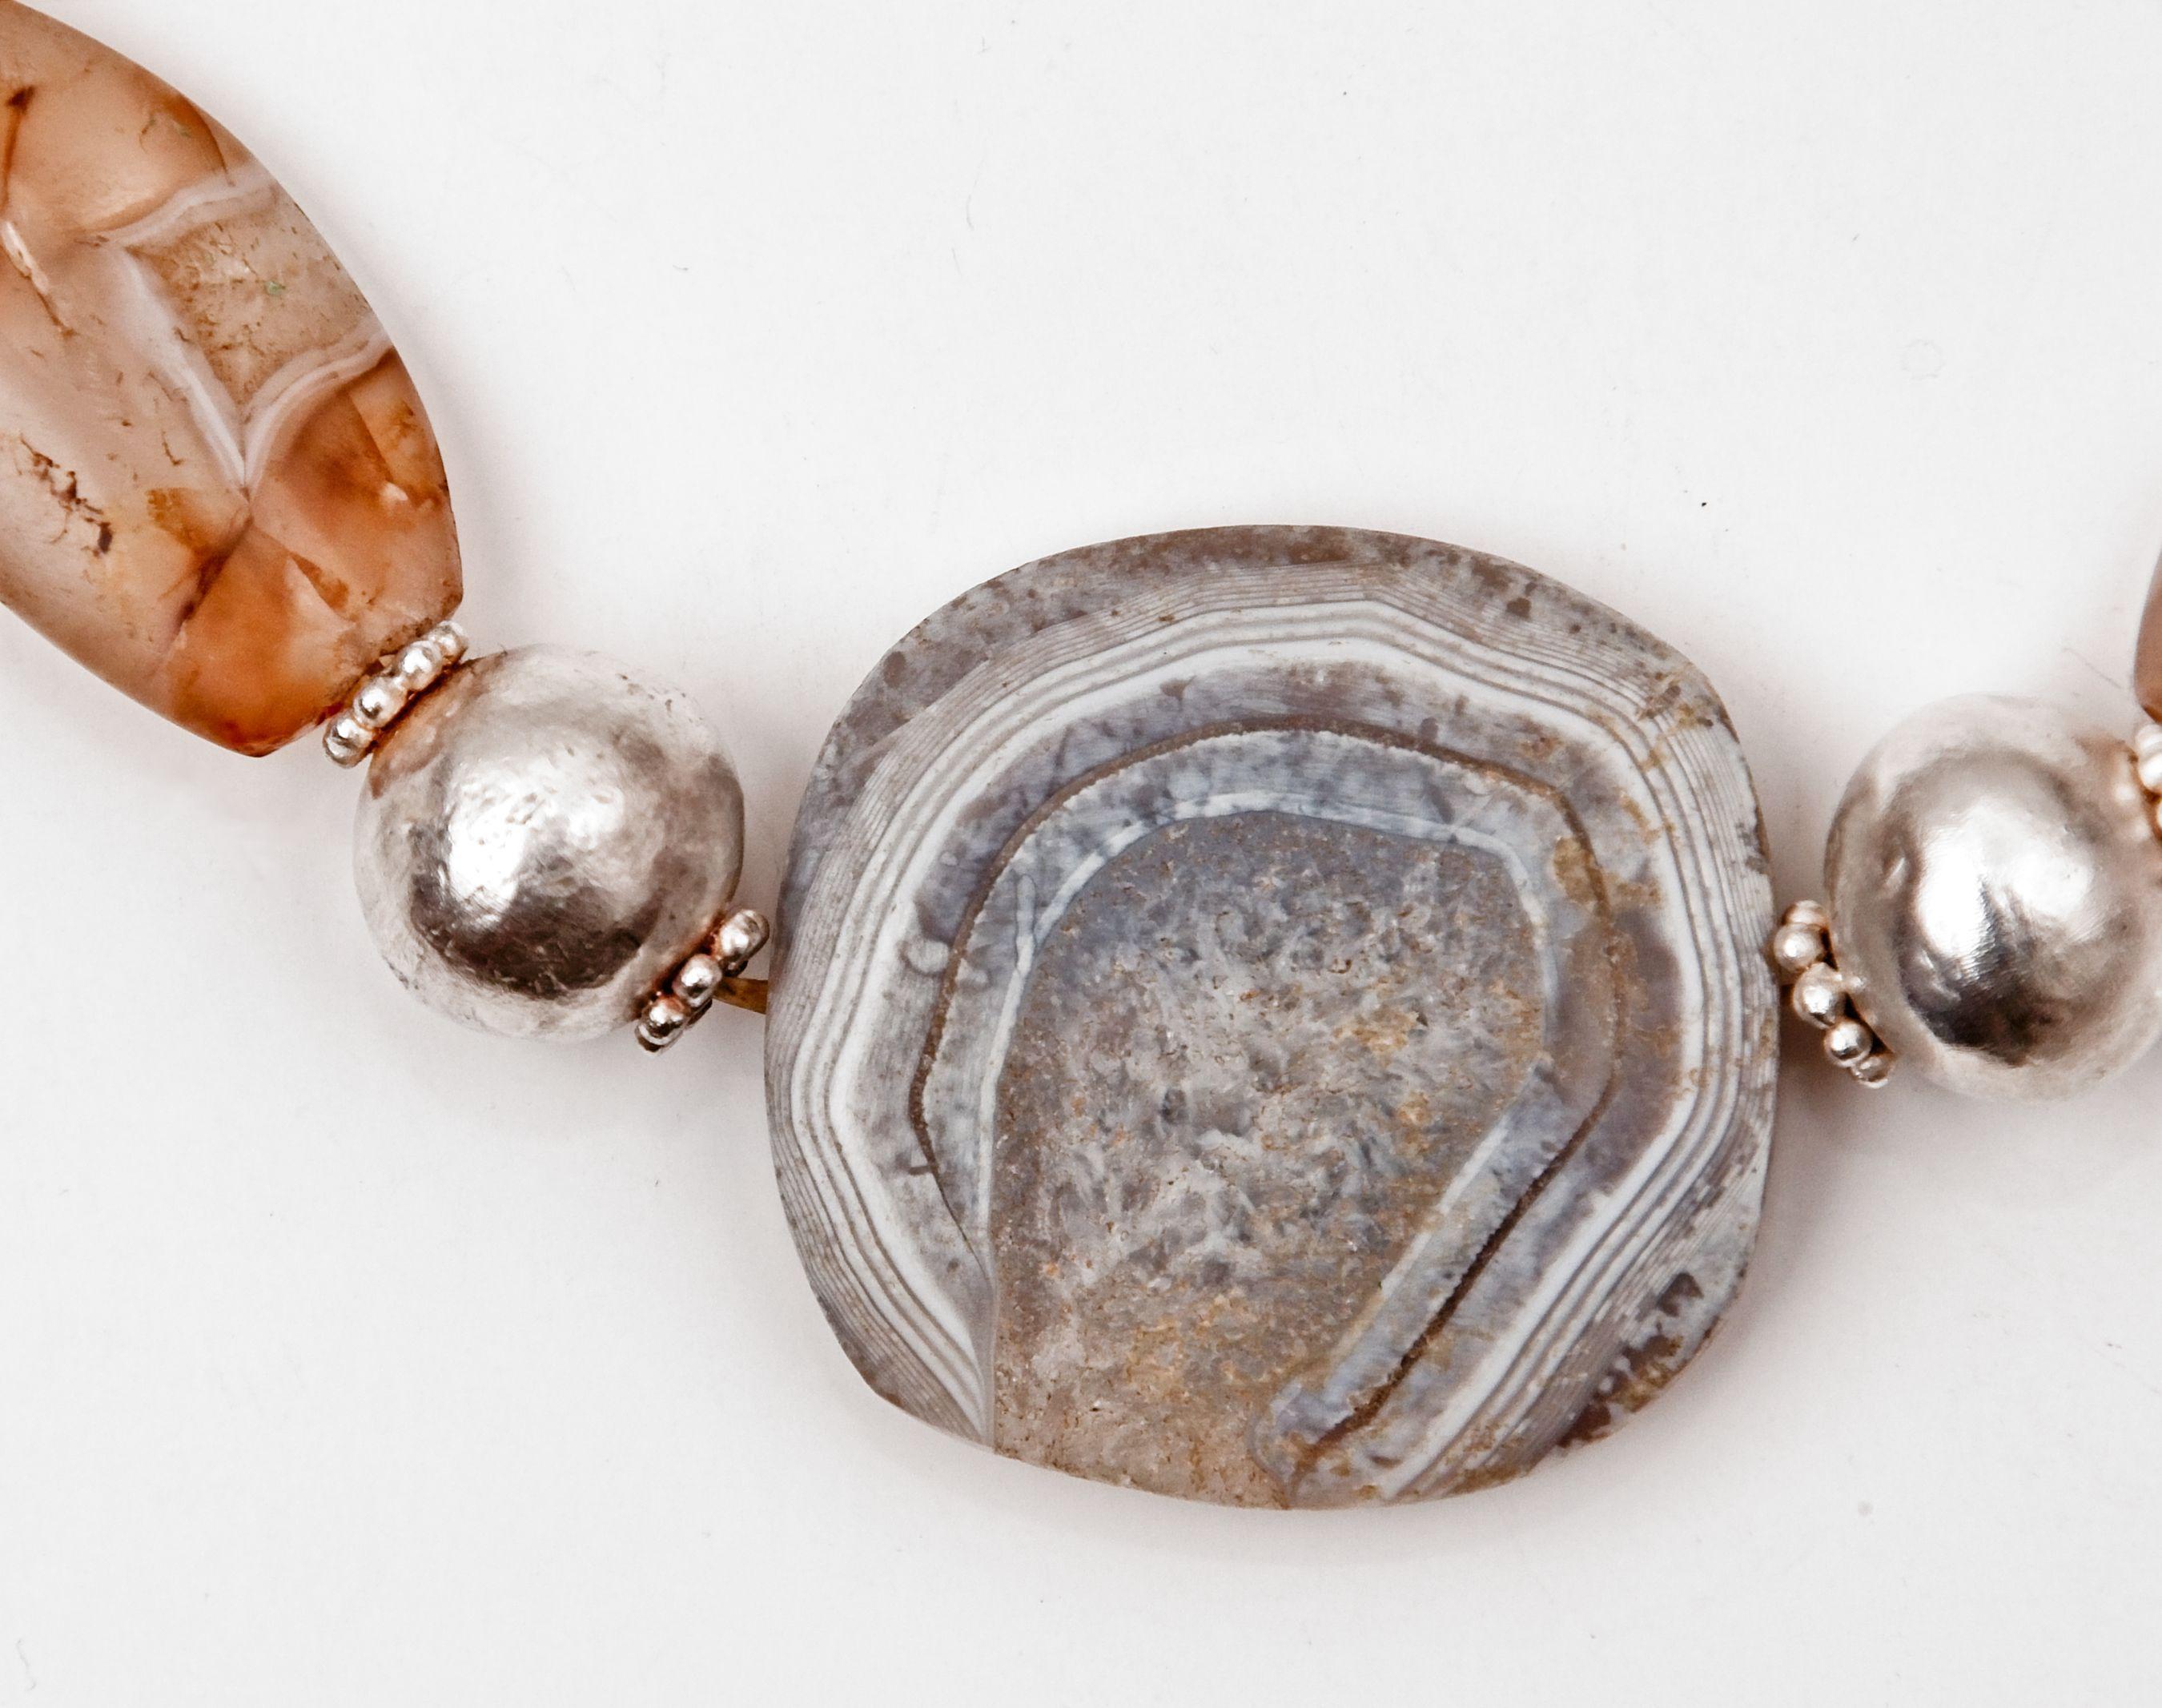 Seventeen Bronze Age agate beads alternating with sixteen Fine silver beads. Ten of the silver beads are spherical with granulated collars, six of the beads are composed entirely of grains, two tiers of six grain circlets, and two of these beads